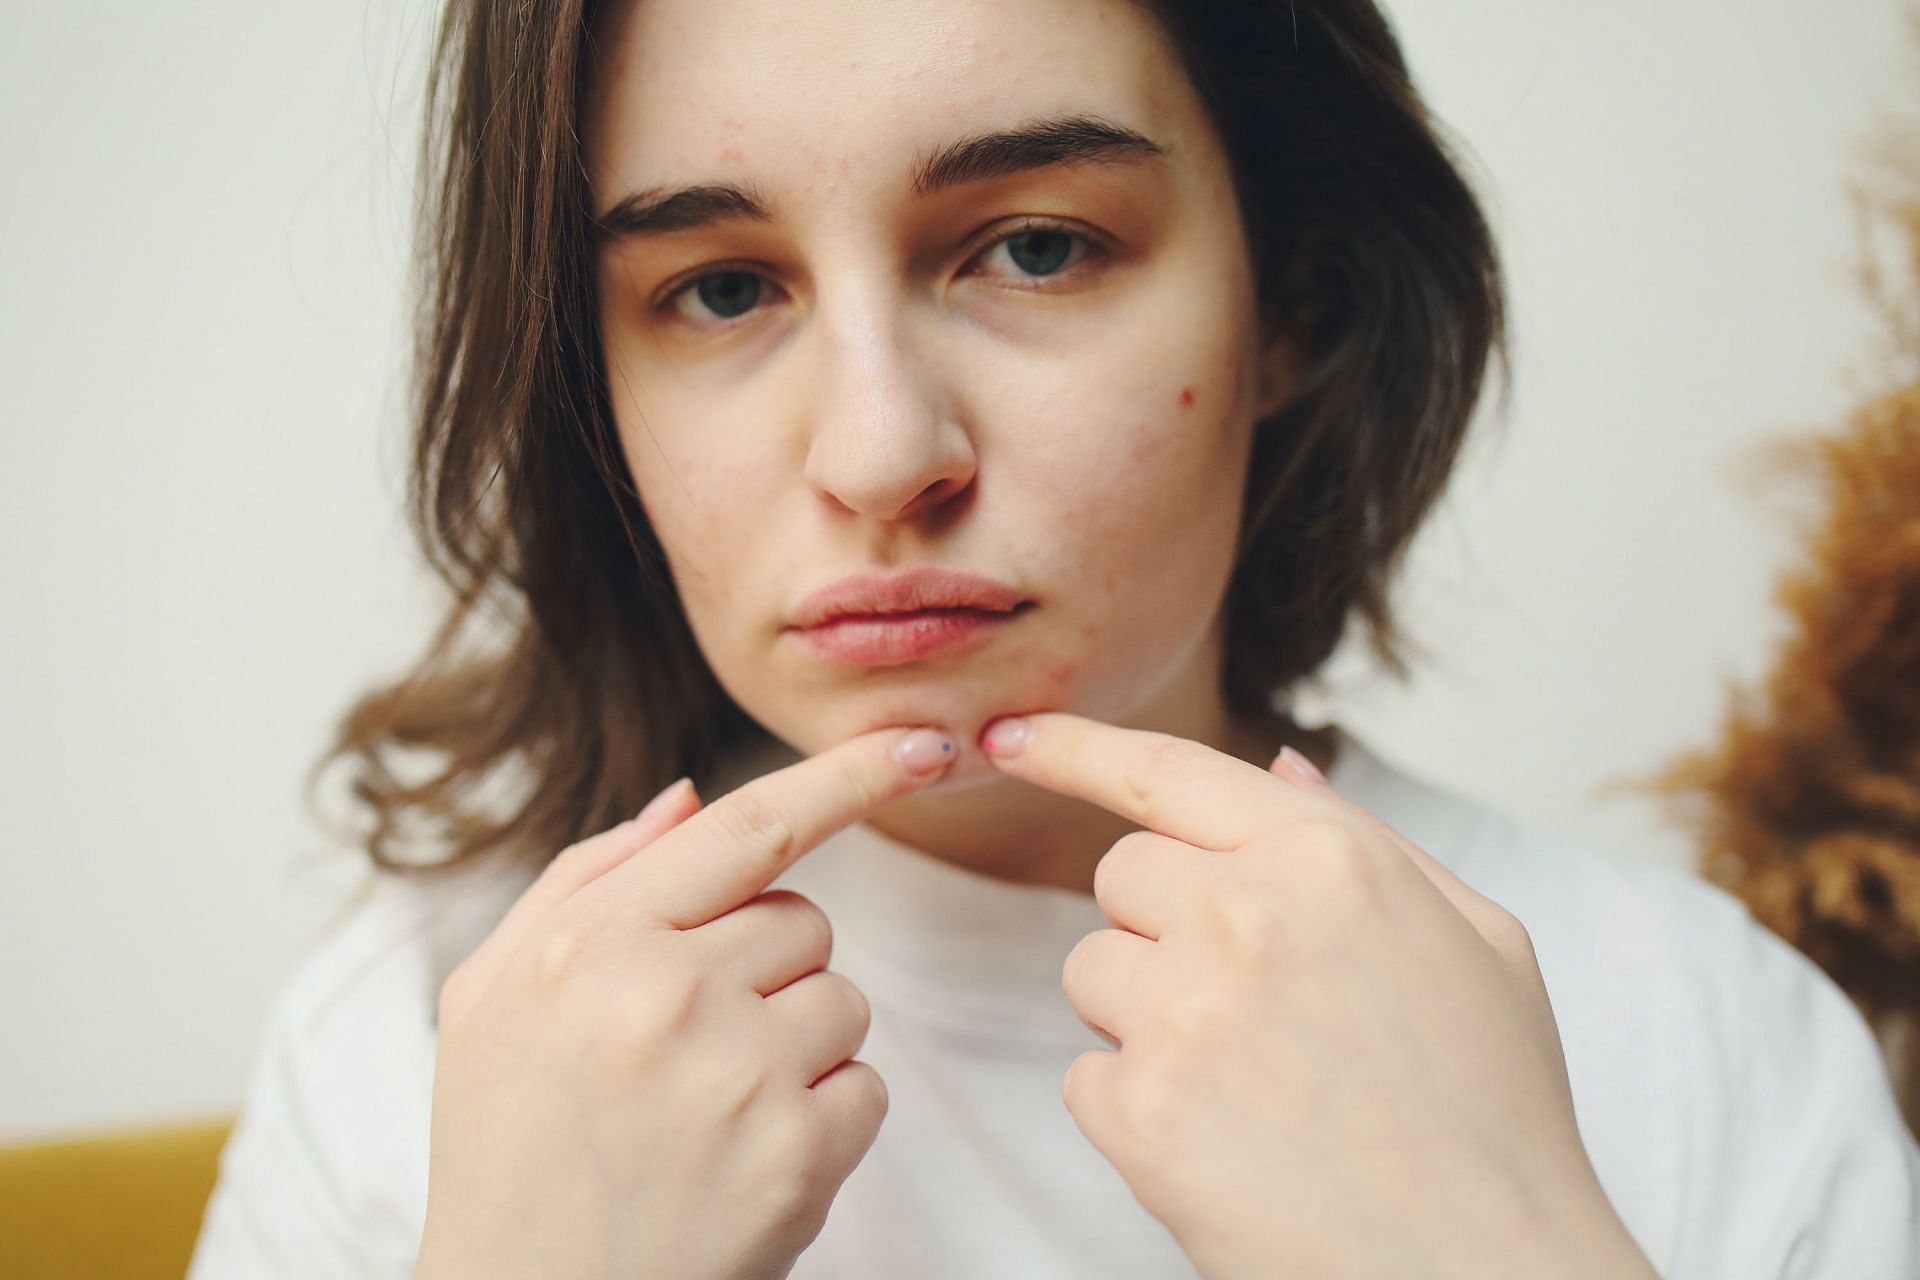 You shouldn&#039;t pop your acne, as it can lead to permanent scarring. (Image via Pexels/Polina Tankilevitch)